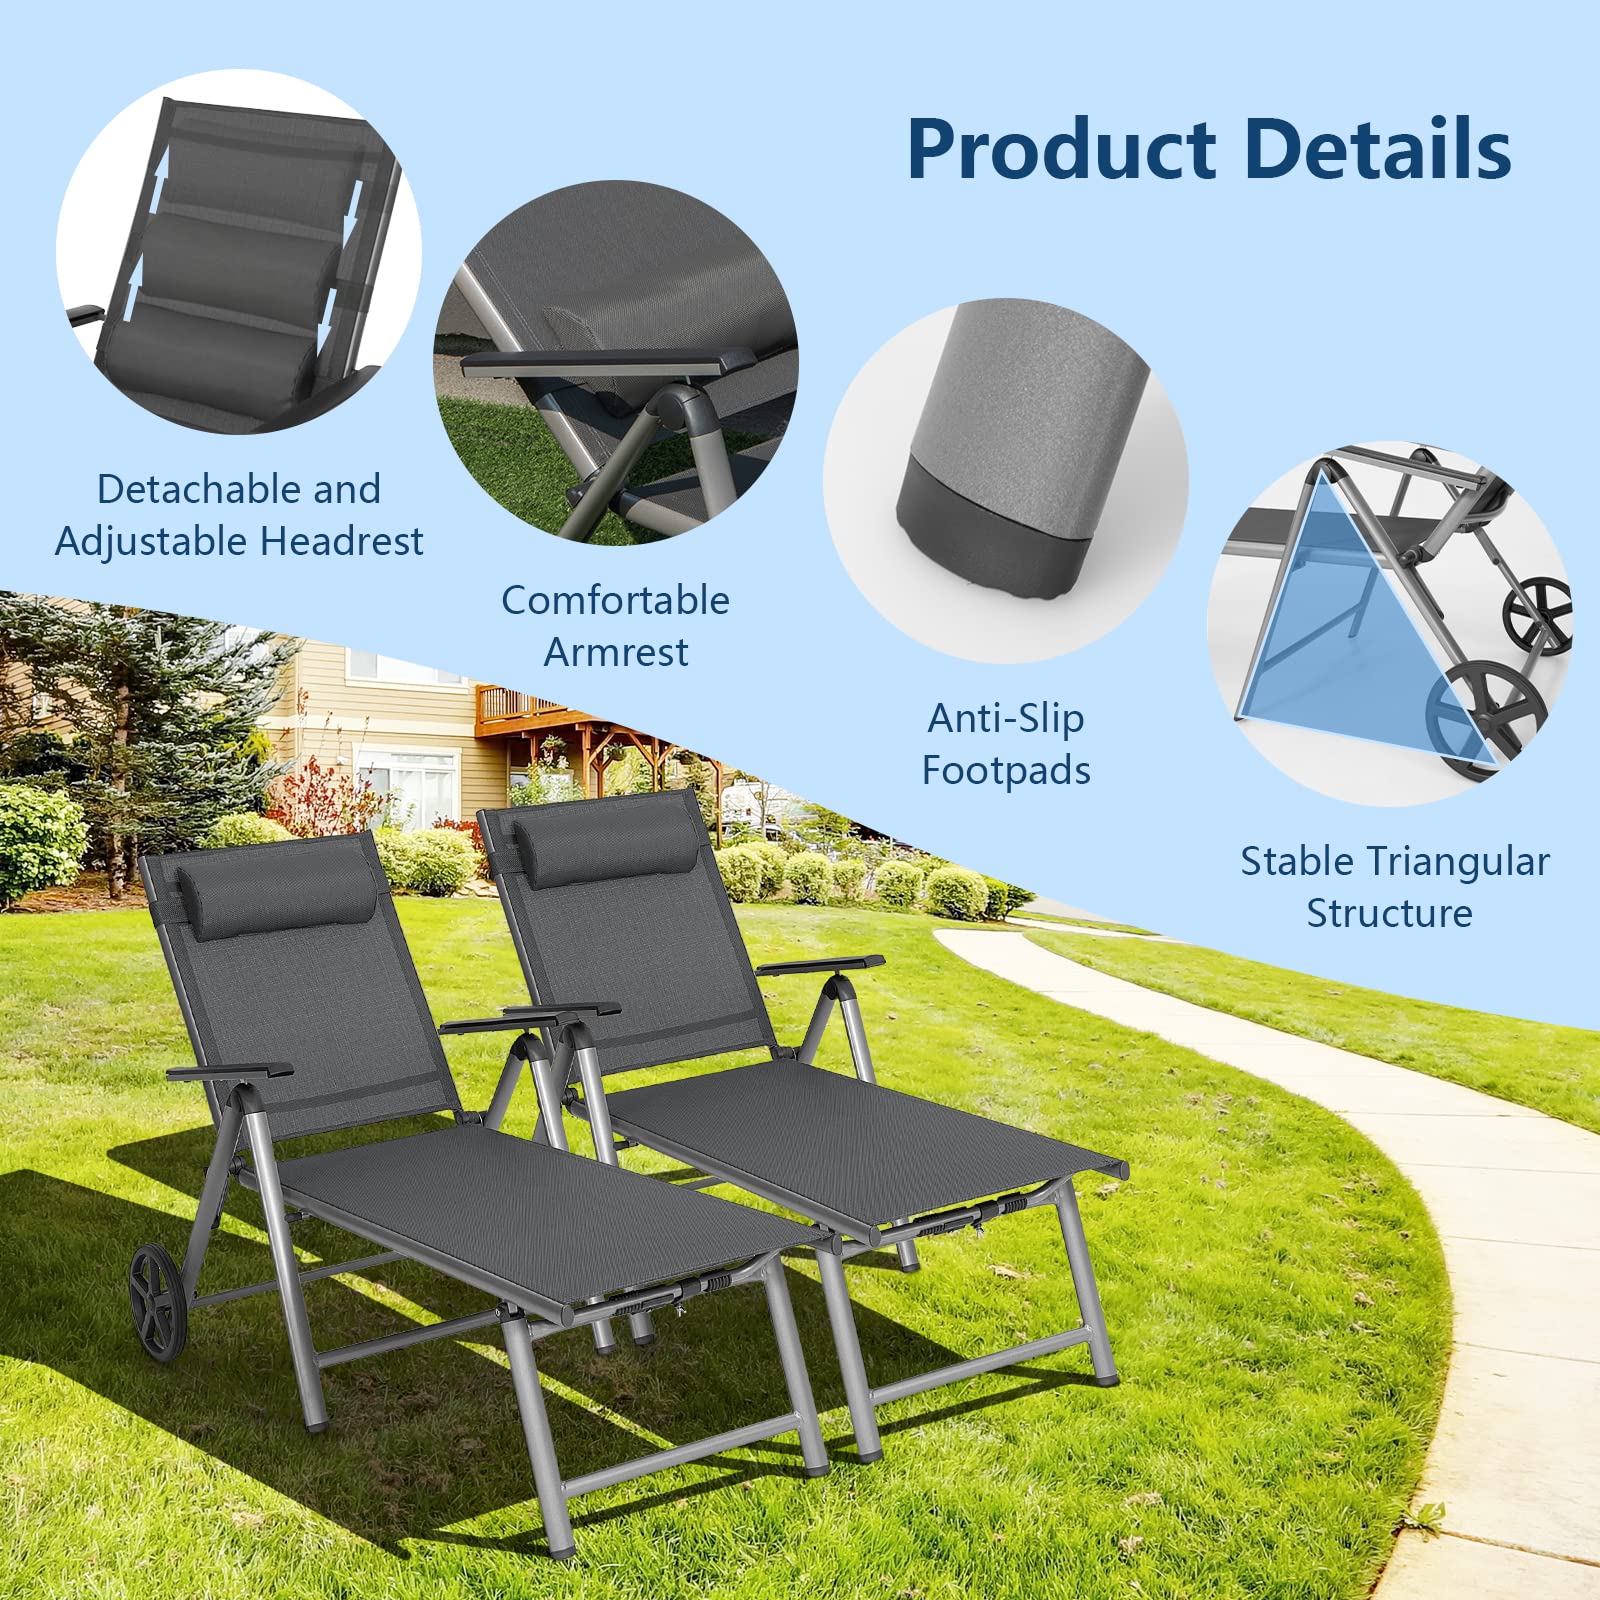 Giantex Chaise Lounge Outdoor Chair- Patio Folding Lounge Chair with Wheels, 7 Adjustable Level